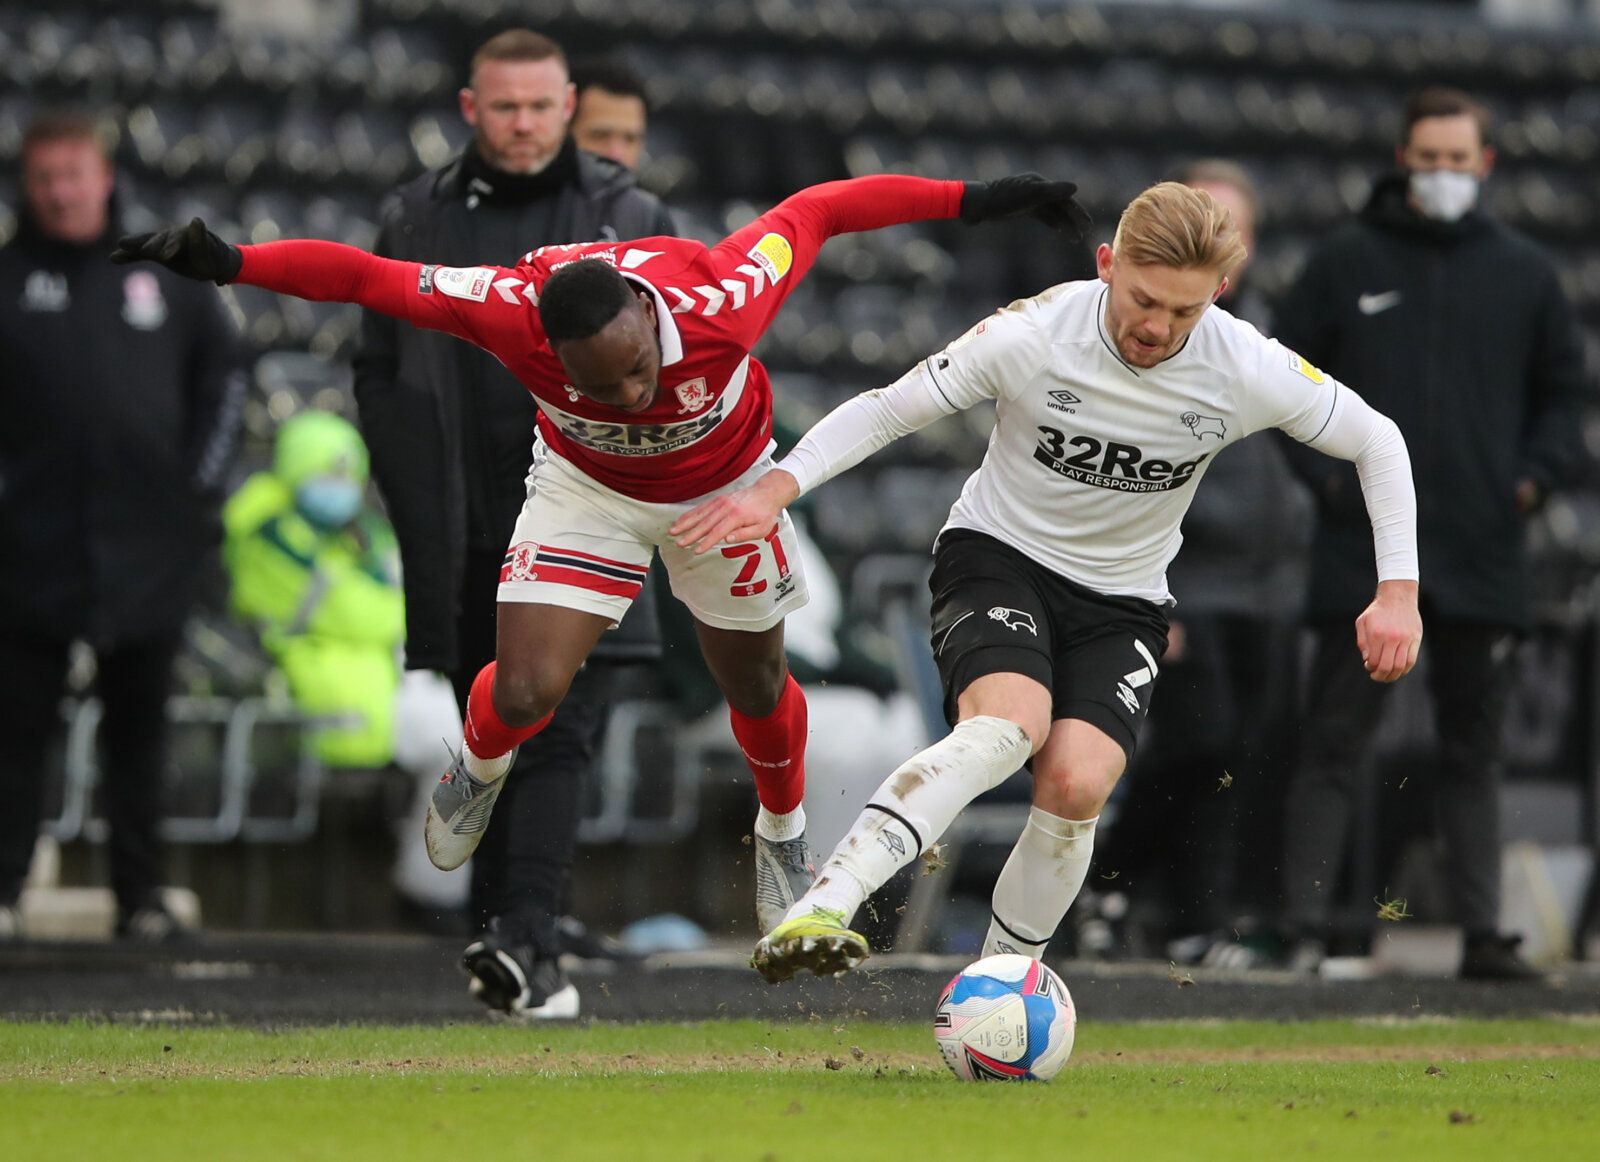 Soccer Football - Championship - Derby County v Middlesbrough - Pride Park, Derby, Britain - February 13, 2021 Middlesbrough's Neeskens Kebano in action with Derby County's Kamil Jozwiak Action Images/Molly Darlington EDITORIAL USE ONLY. No use with unauthorized audio, video, data, fixture lists, club/league logos or 'live' services. Online in-match use limited to 75 images, no video emulation. No use in betting, games or single club /league/player publications.  Please contact your account repr